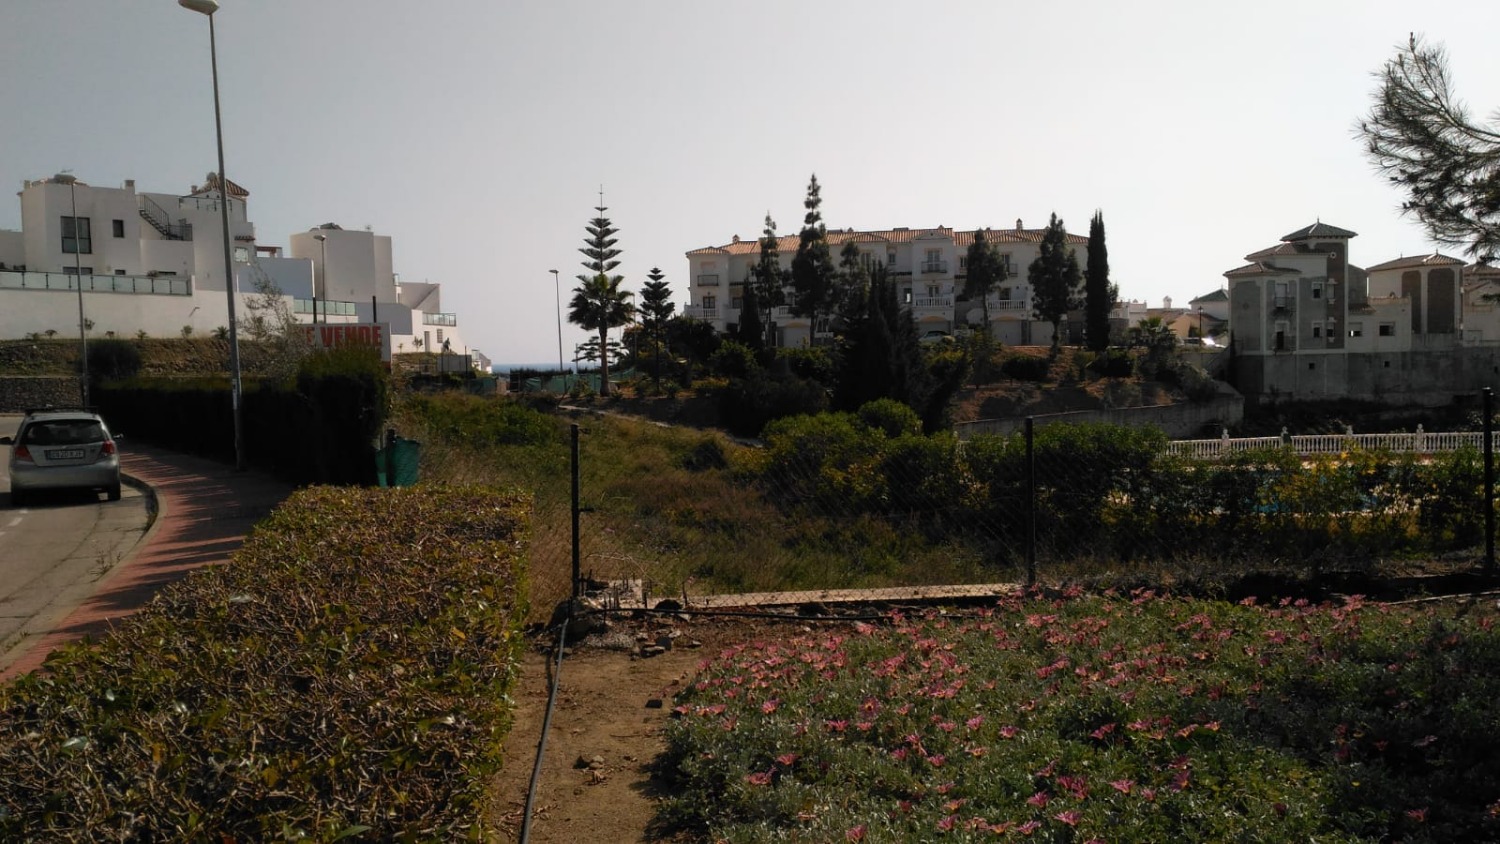 Land for sale, in great location in Torrox Park